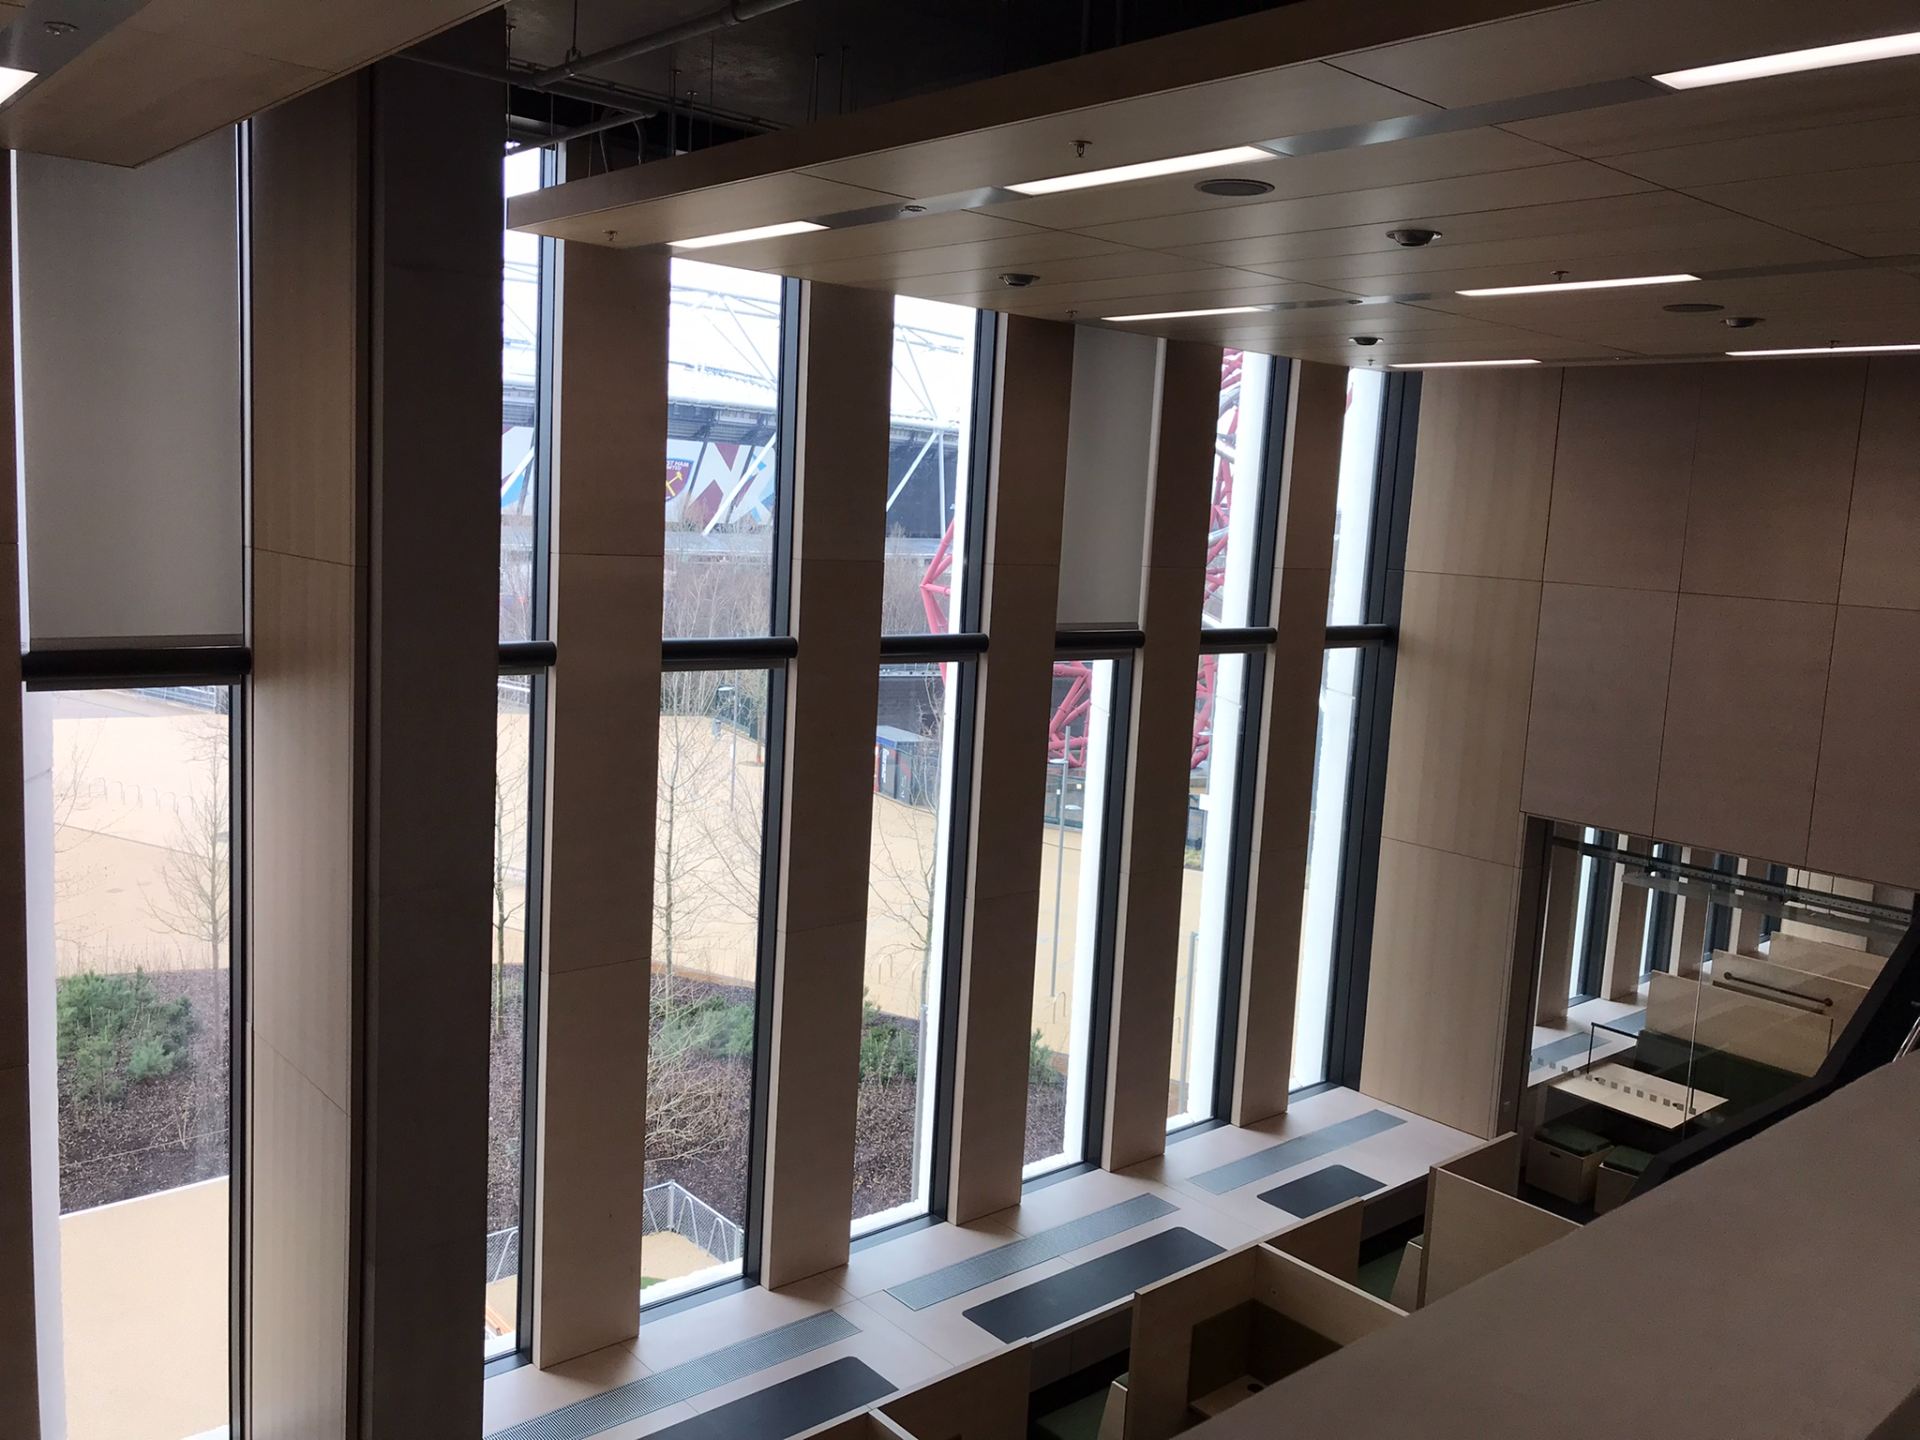 View of learning spaces in the library, looking down from the mezzanine